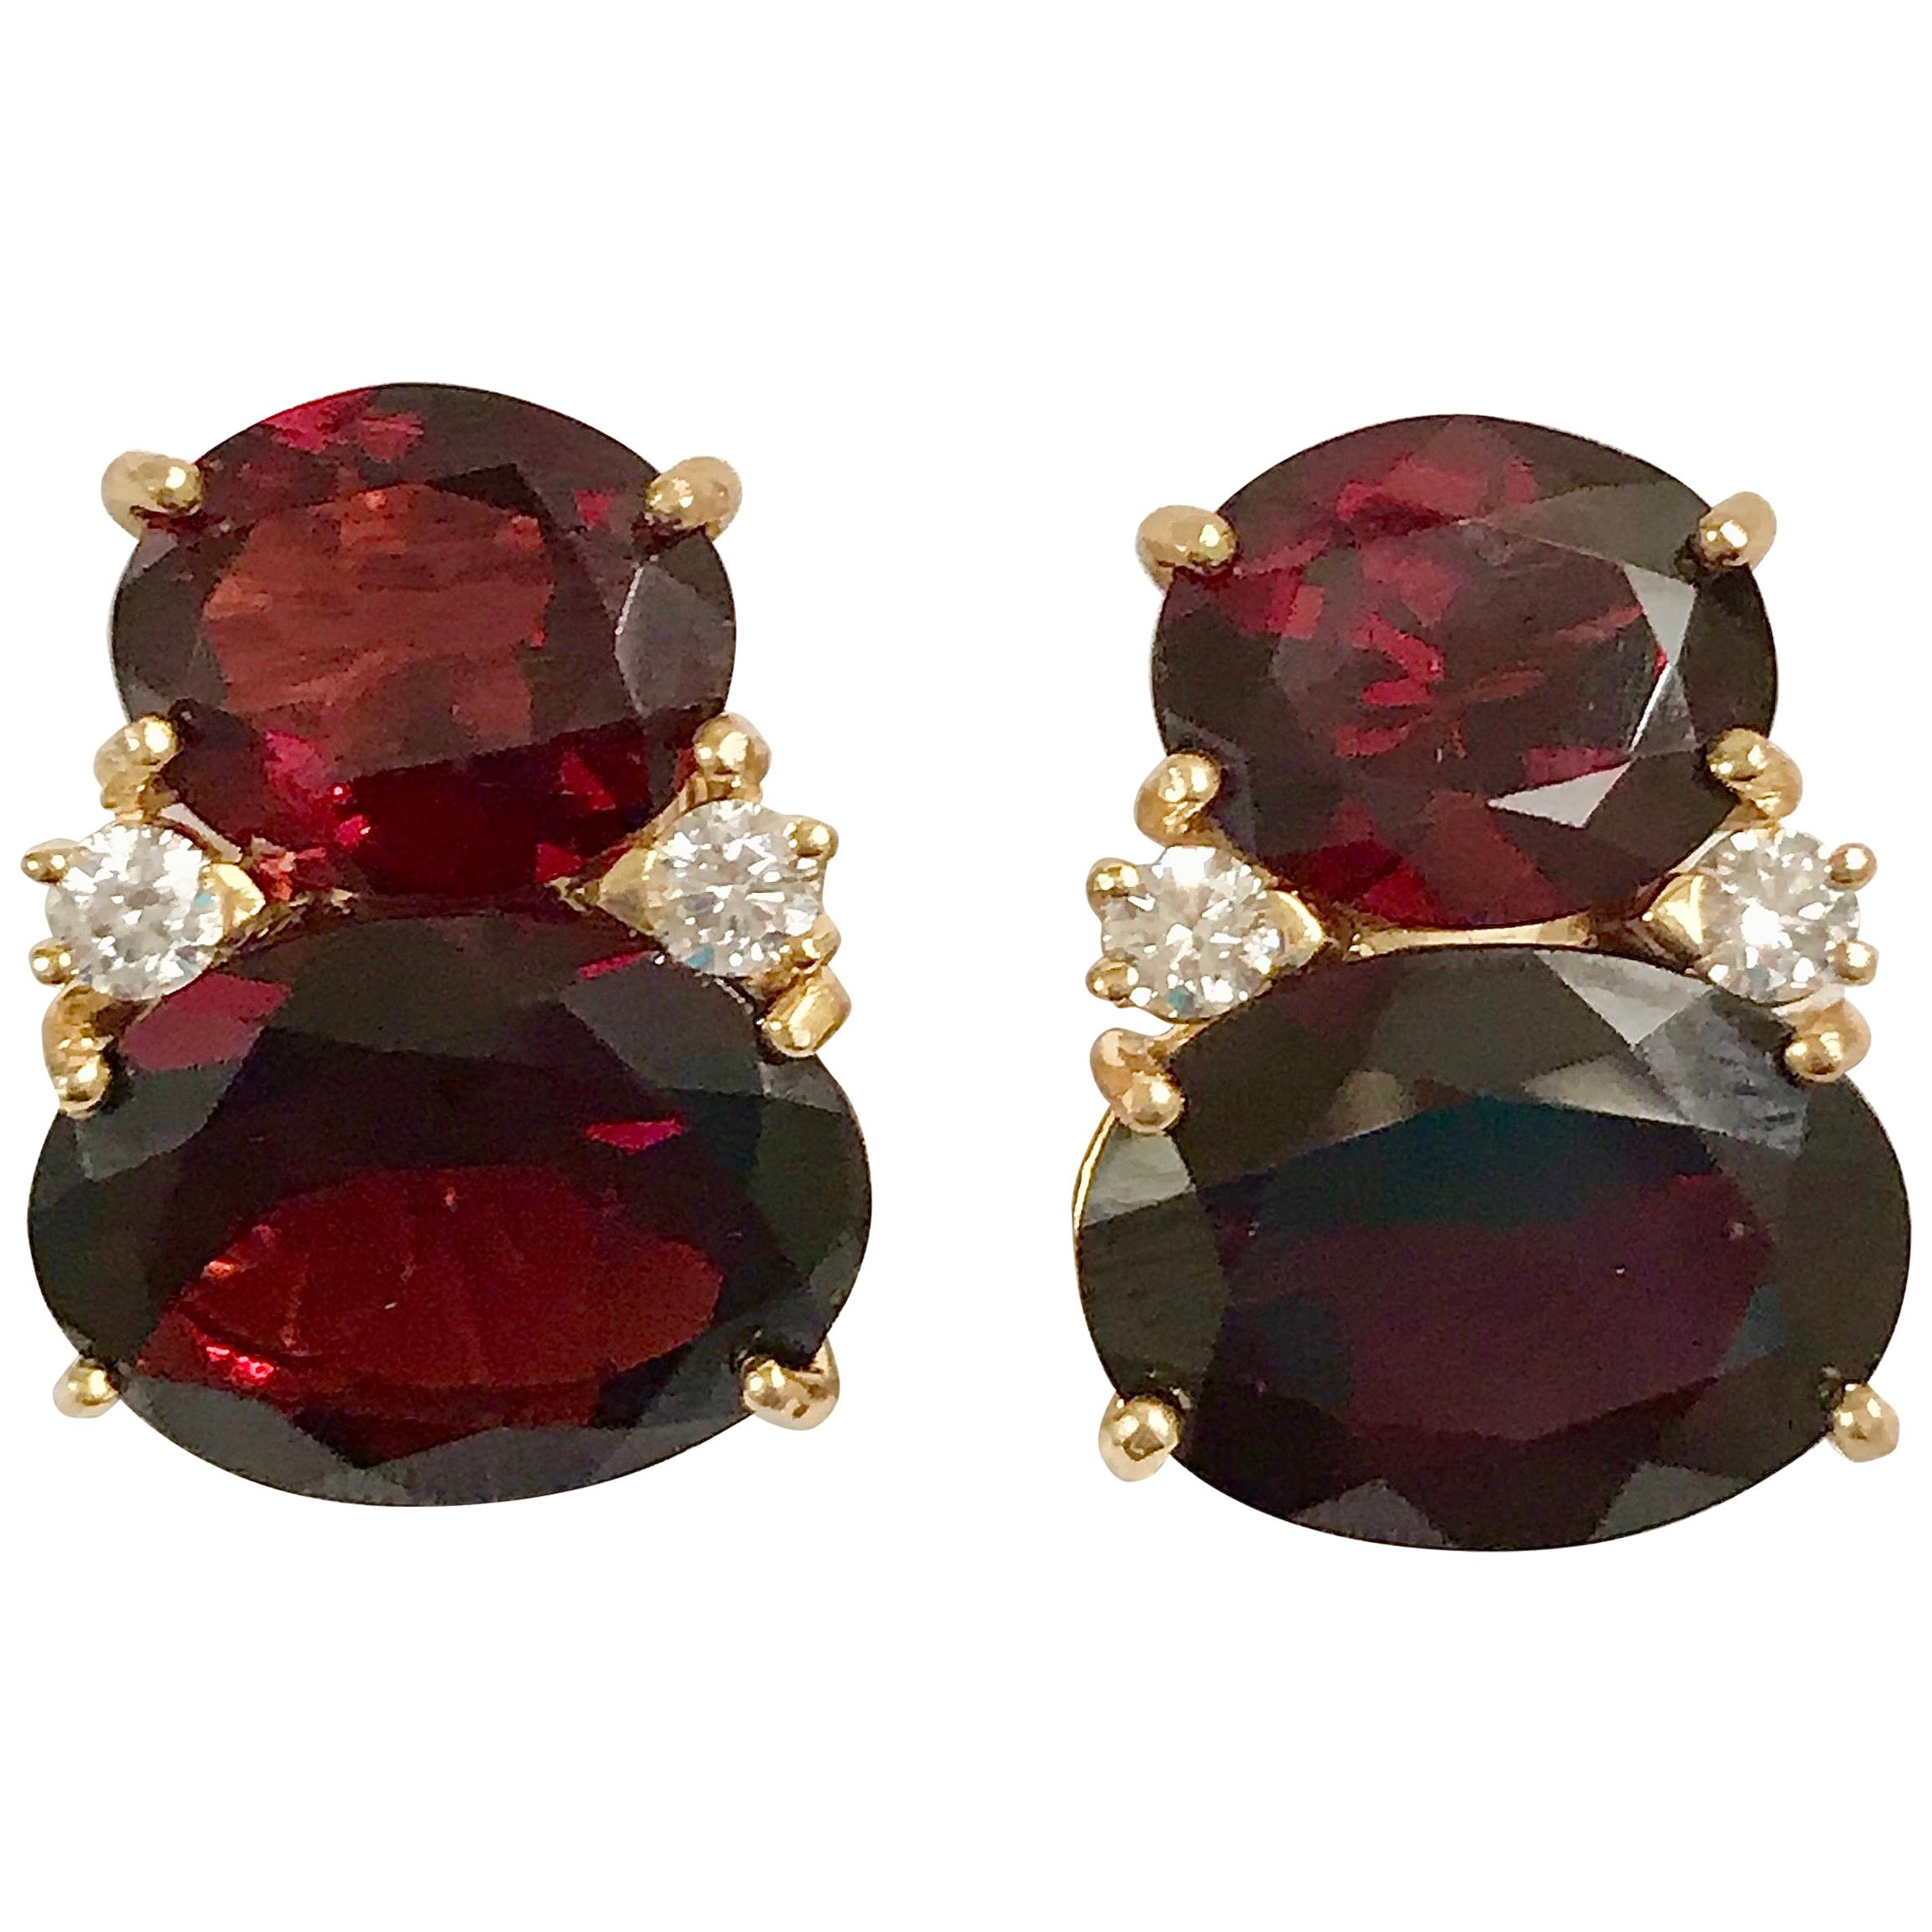 Large GUM DROP Earrings with Faceted Garnet and Diamonds Clip or Pierced